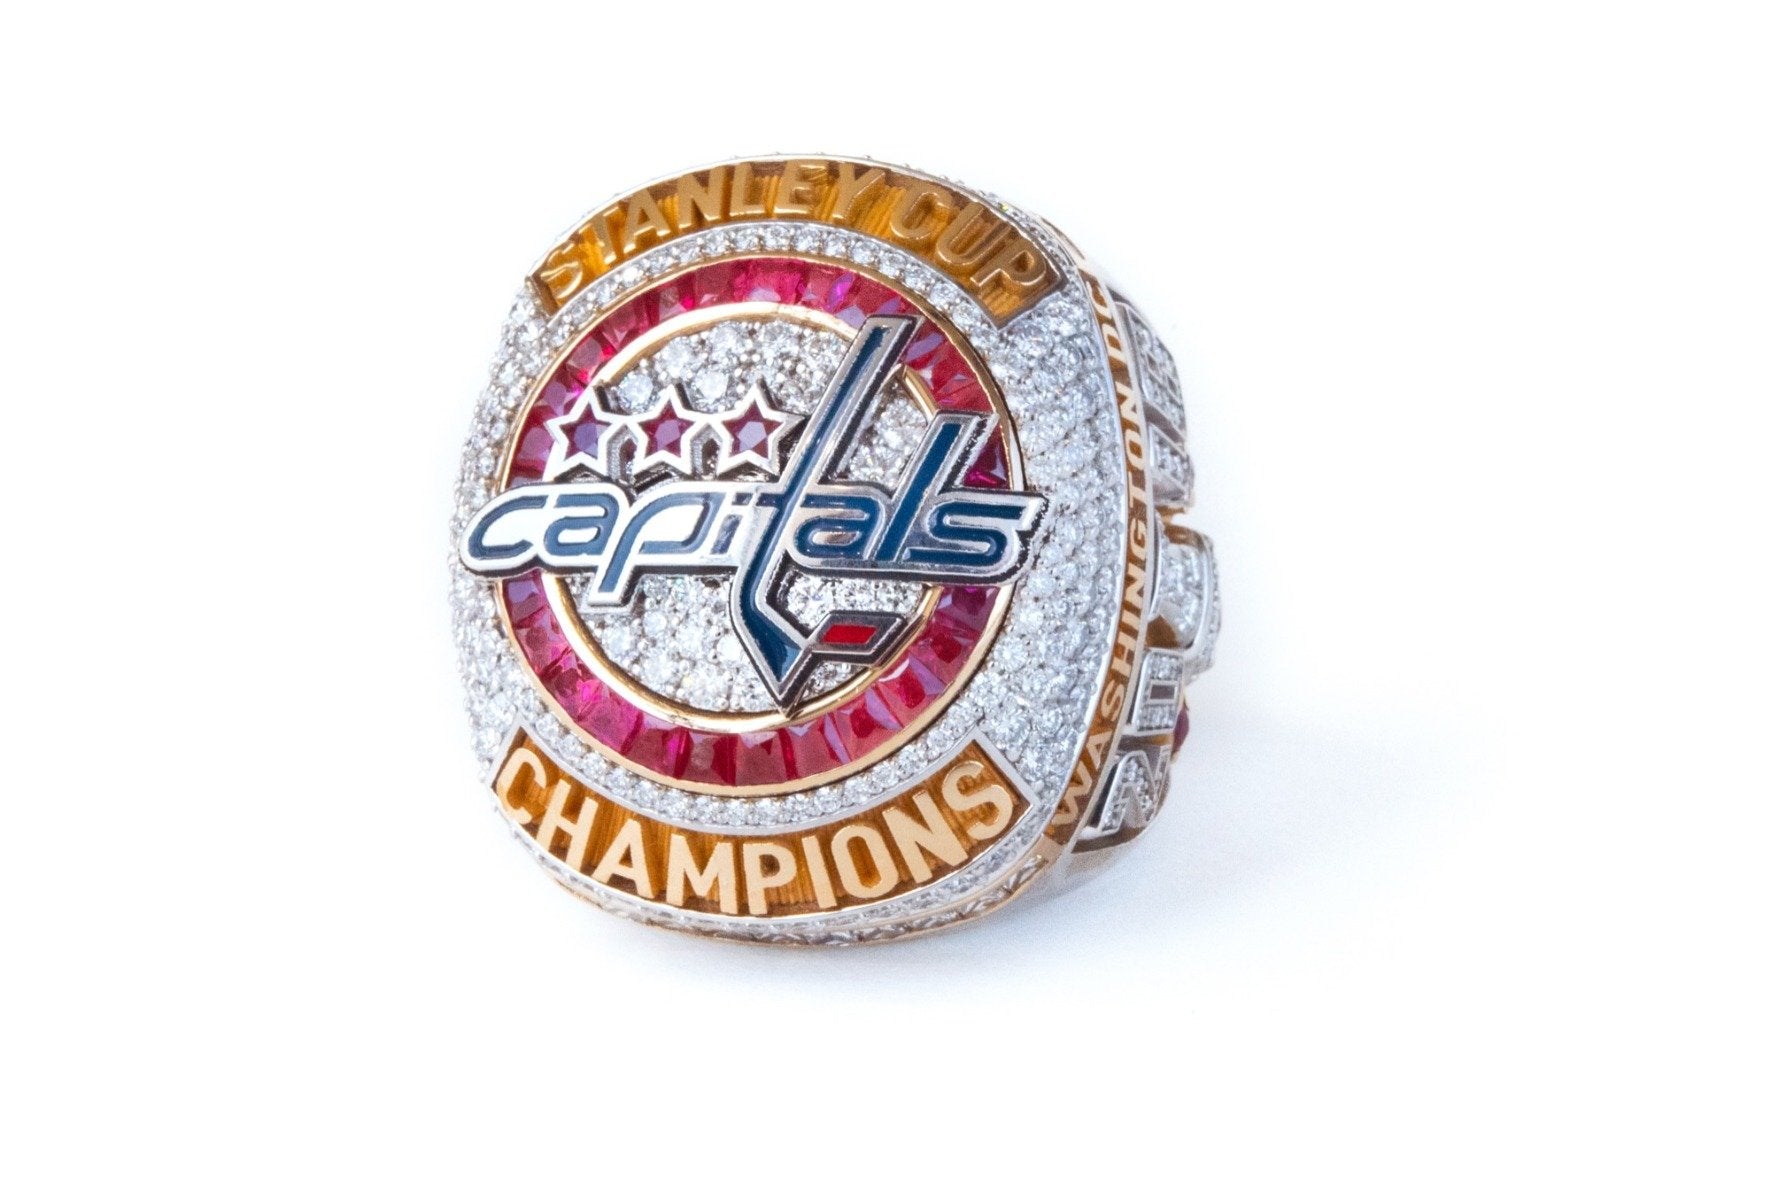 washington capitals 2018 nhl stanley cup champions resin replica